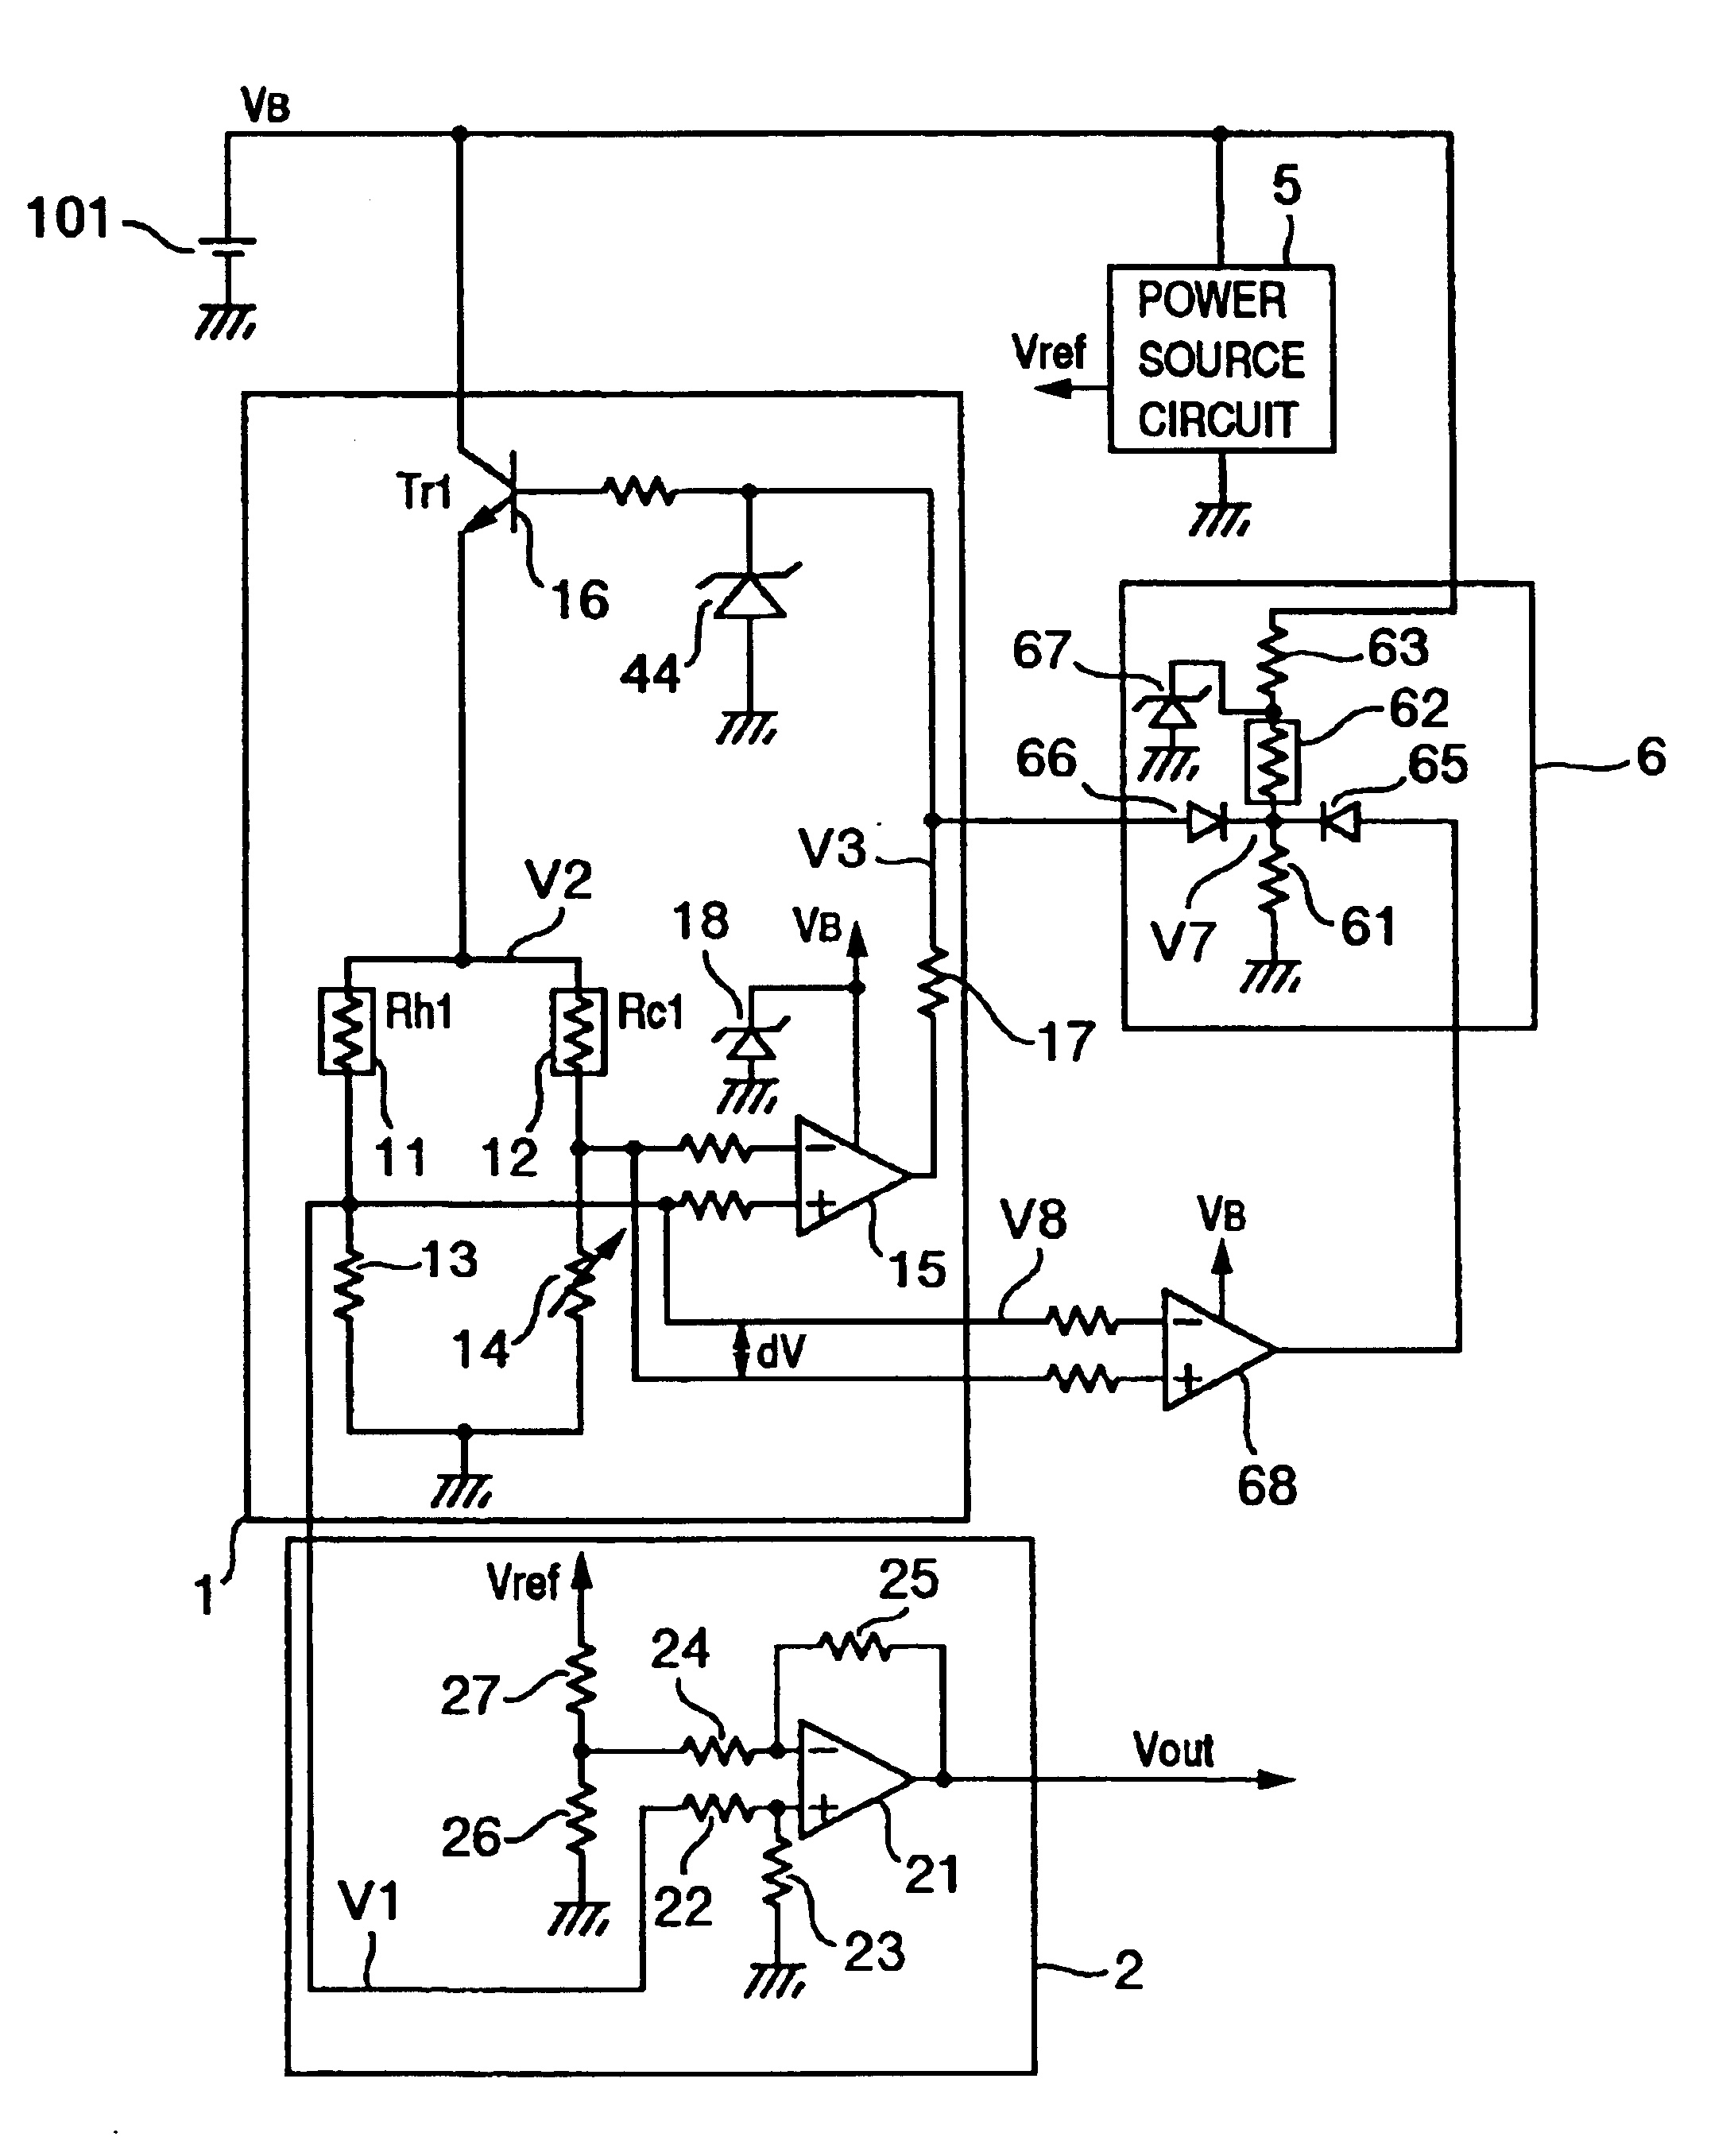 Hot-wire type air flow meter for internal combustion engine